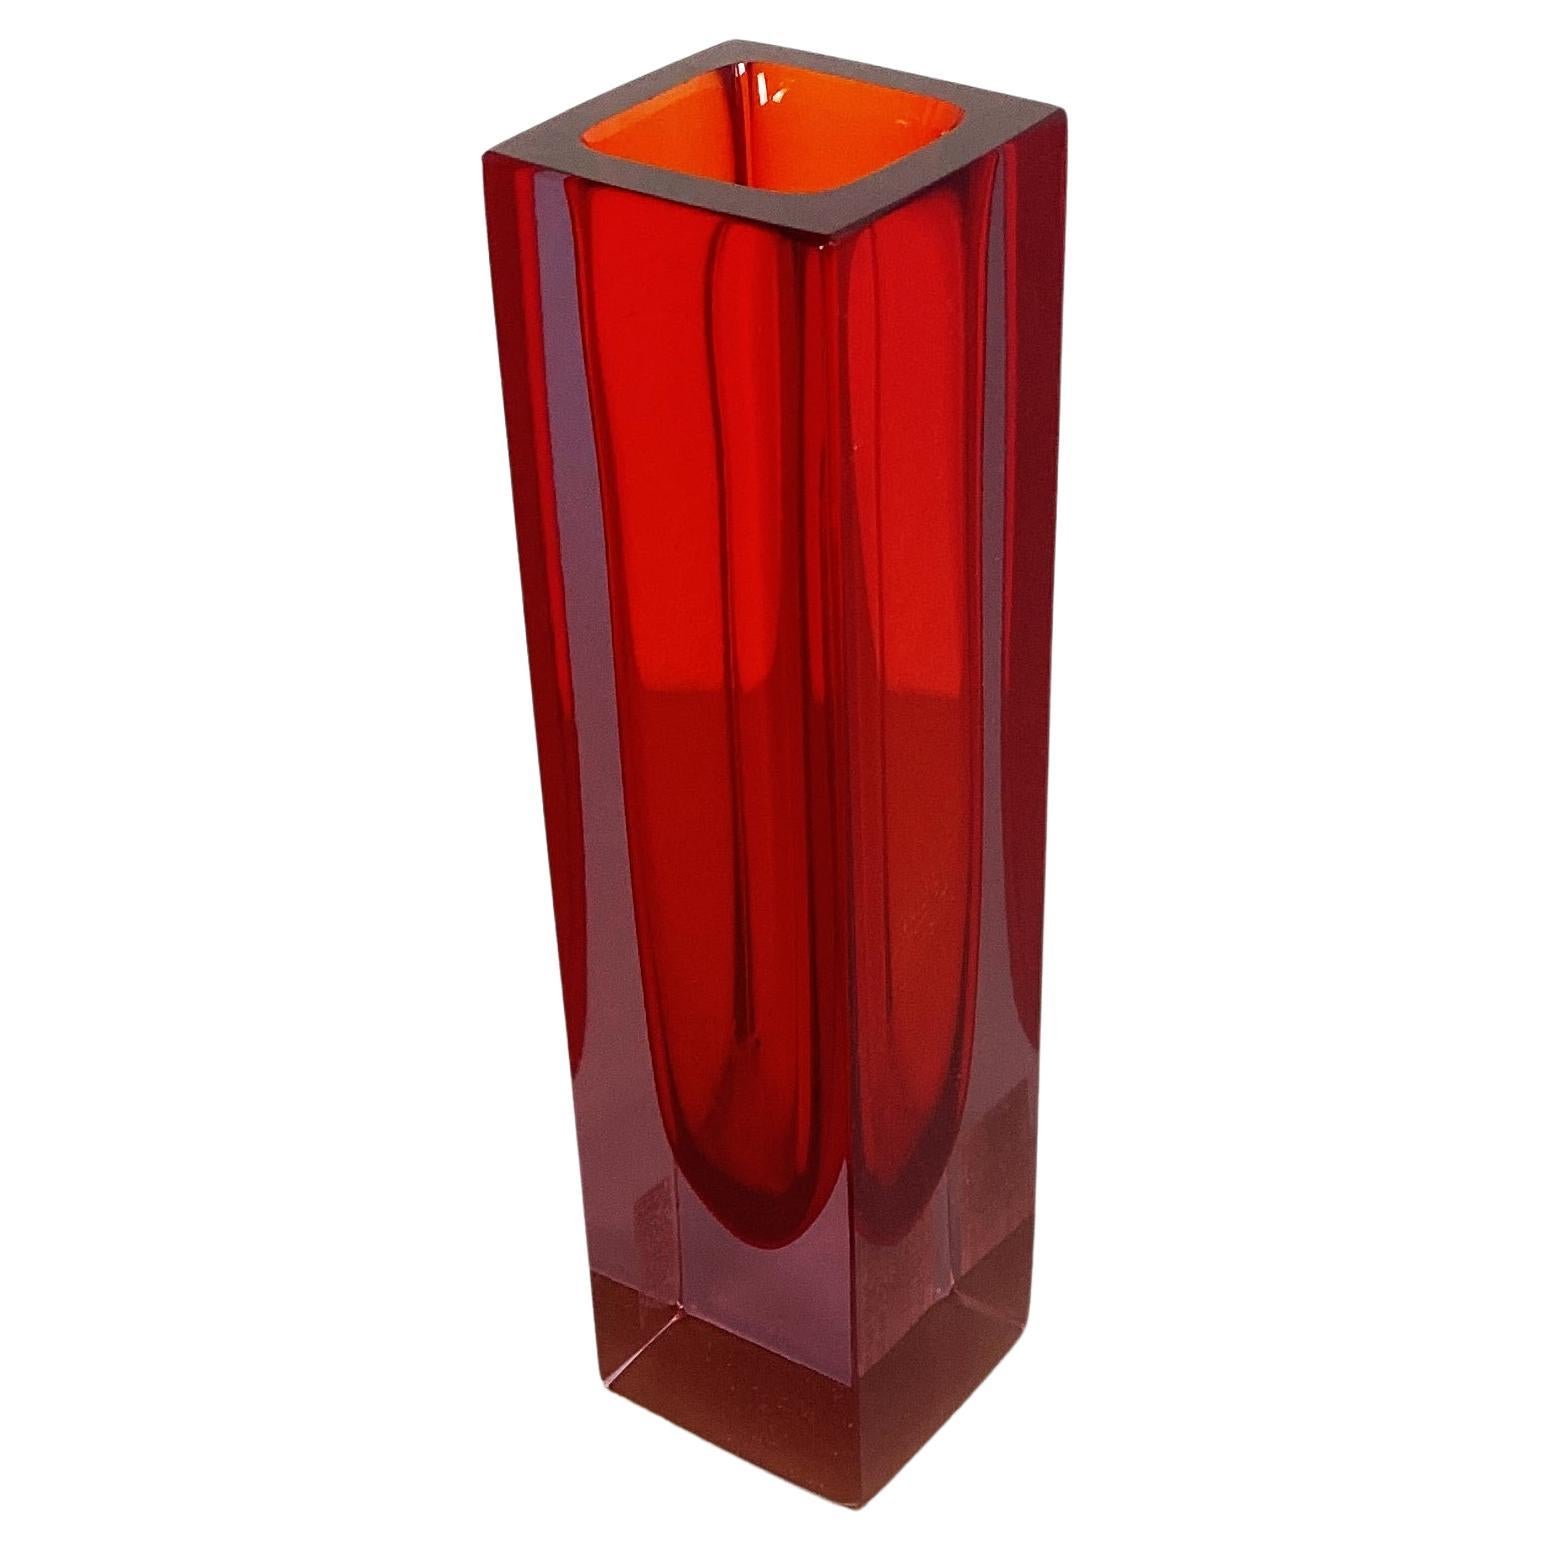 Italian Mid-Century Red Murano Glass Vase with Internal Purple Shades, 1970s For Sale